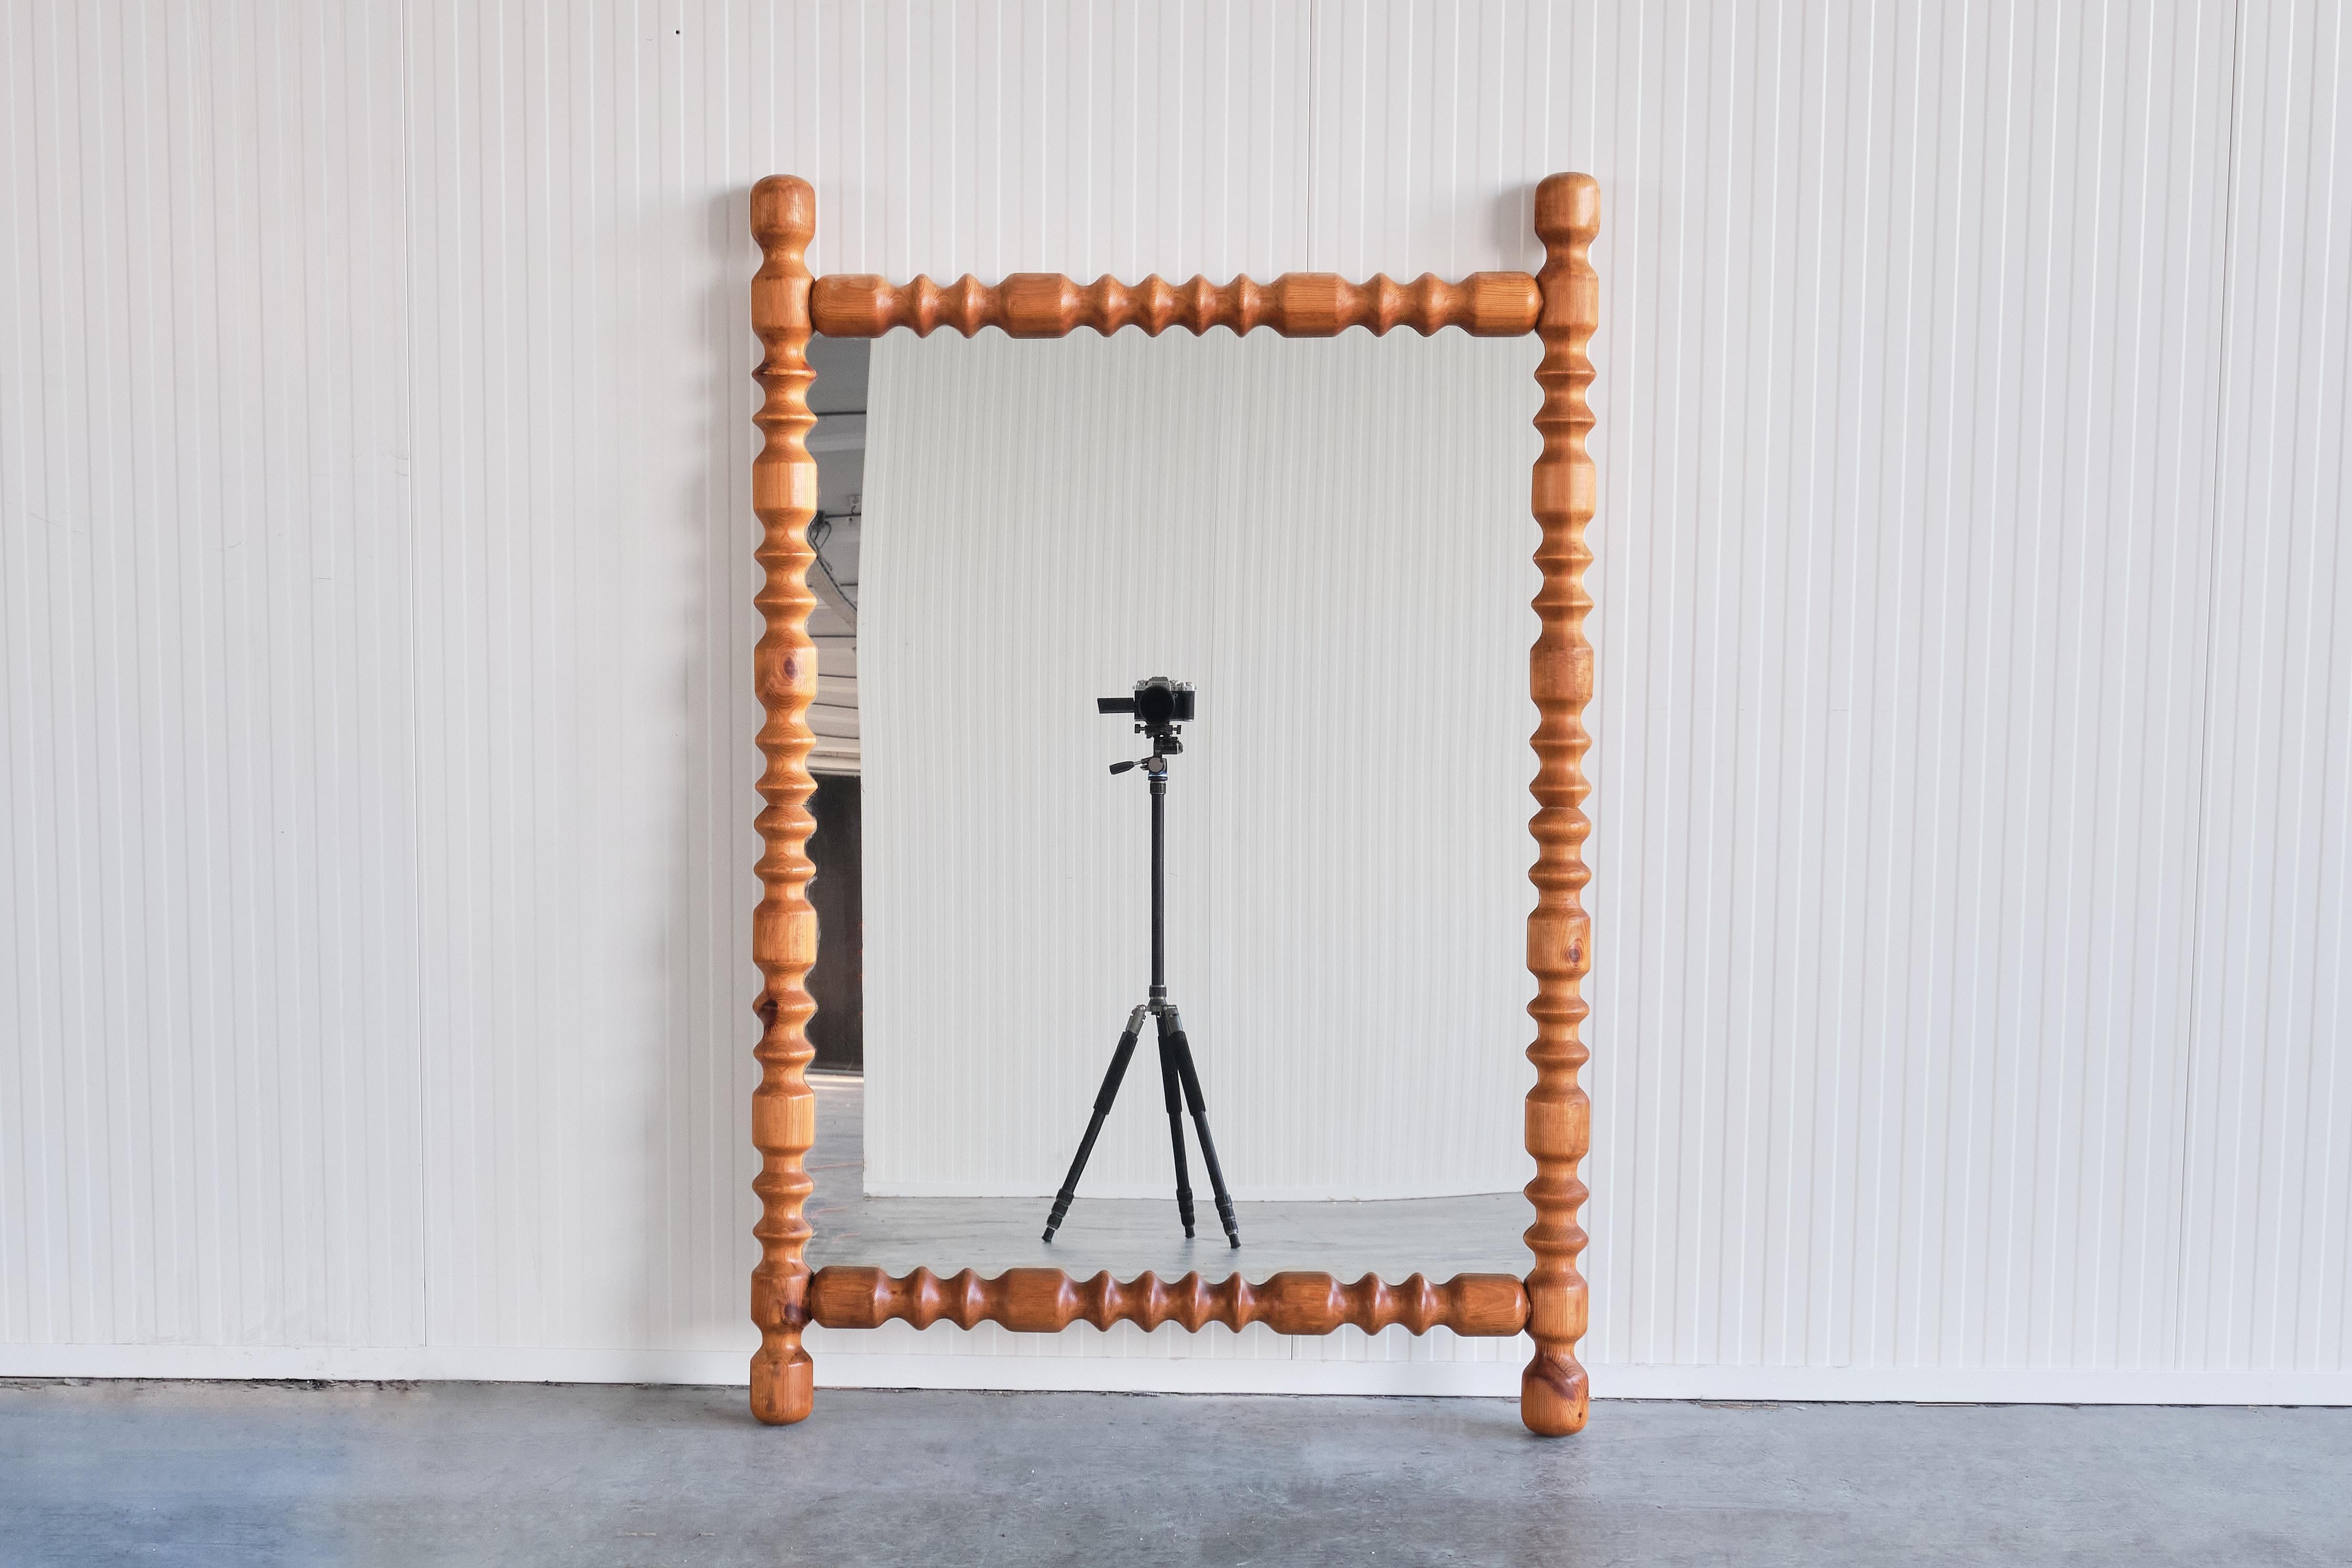 This striking, large mirror was produced by Glas Mäster in Markaryd, Sweden, in the late 1960s.
This generously sized rectangular mirror can be placed as floor mirror and can also be installed as a wall mirror (hanging wire is installed on the